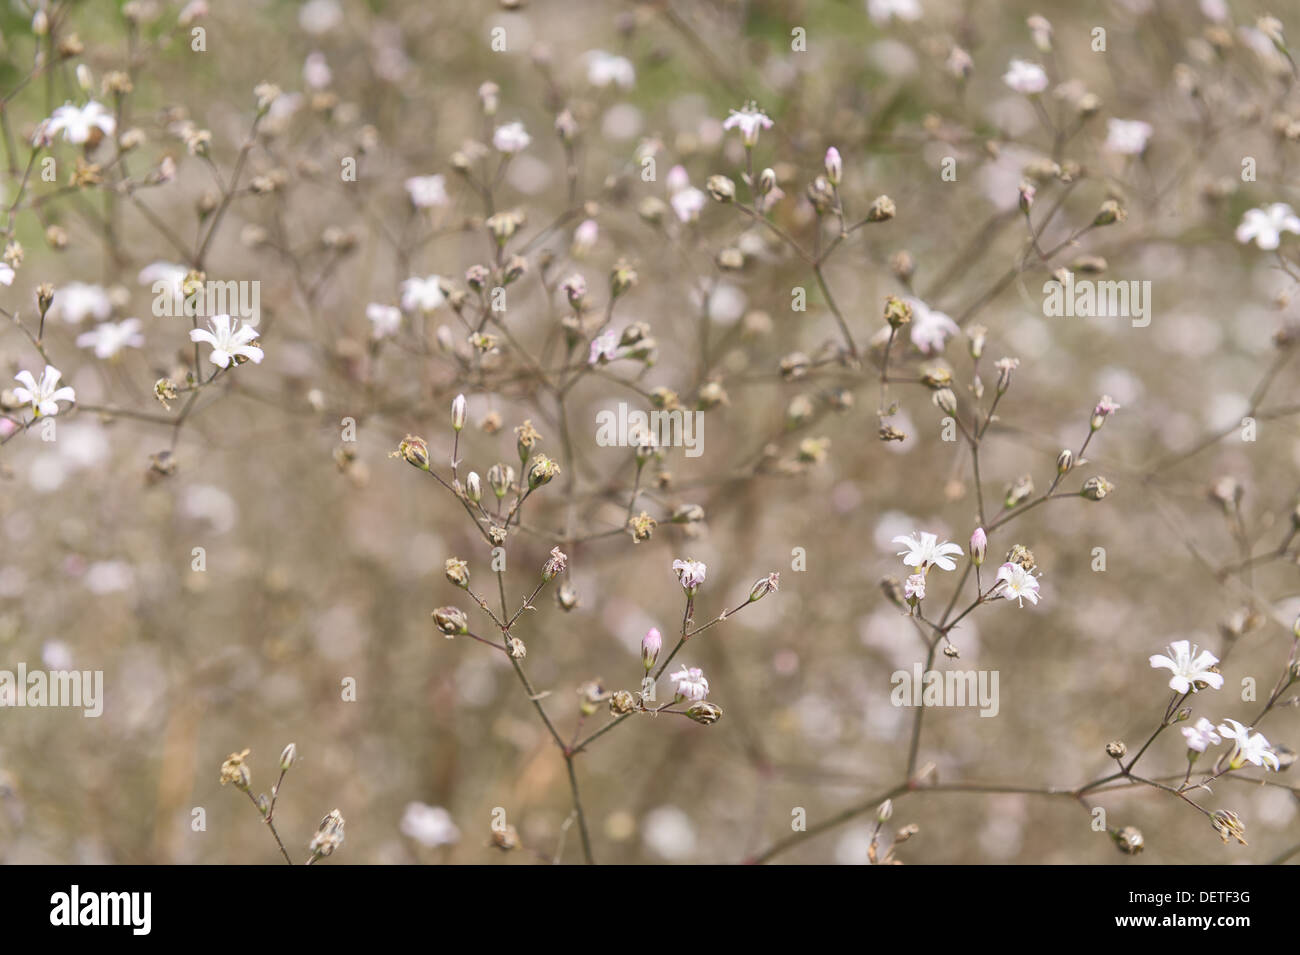 Mist of small gypsophilia flowers dispersed throughout a massive clump of flowering bloom garden bride Stock Photo